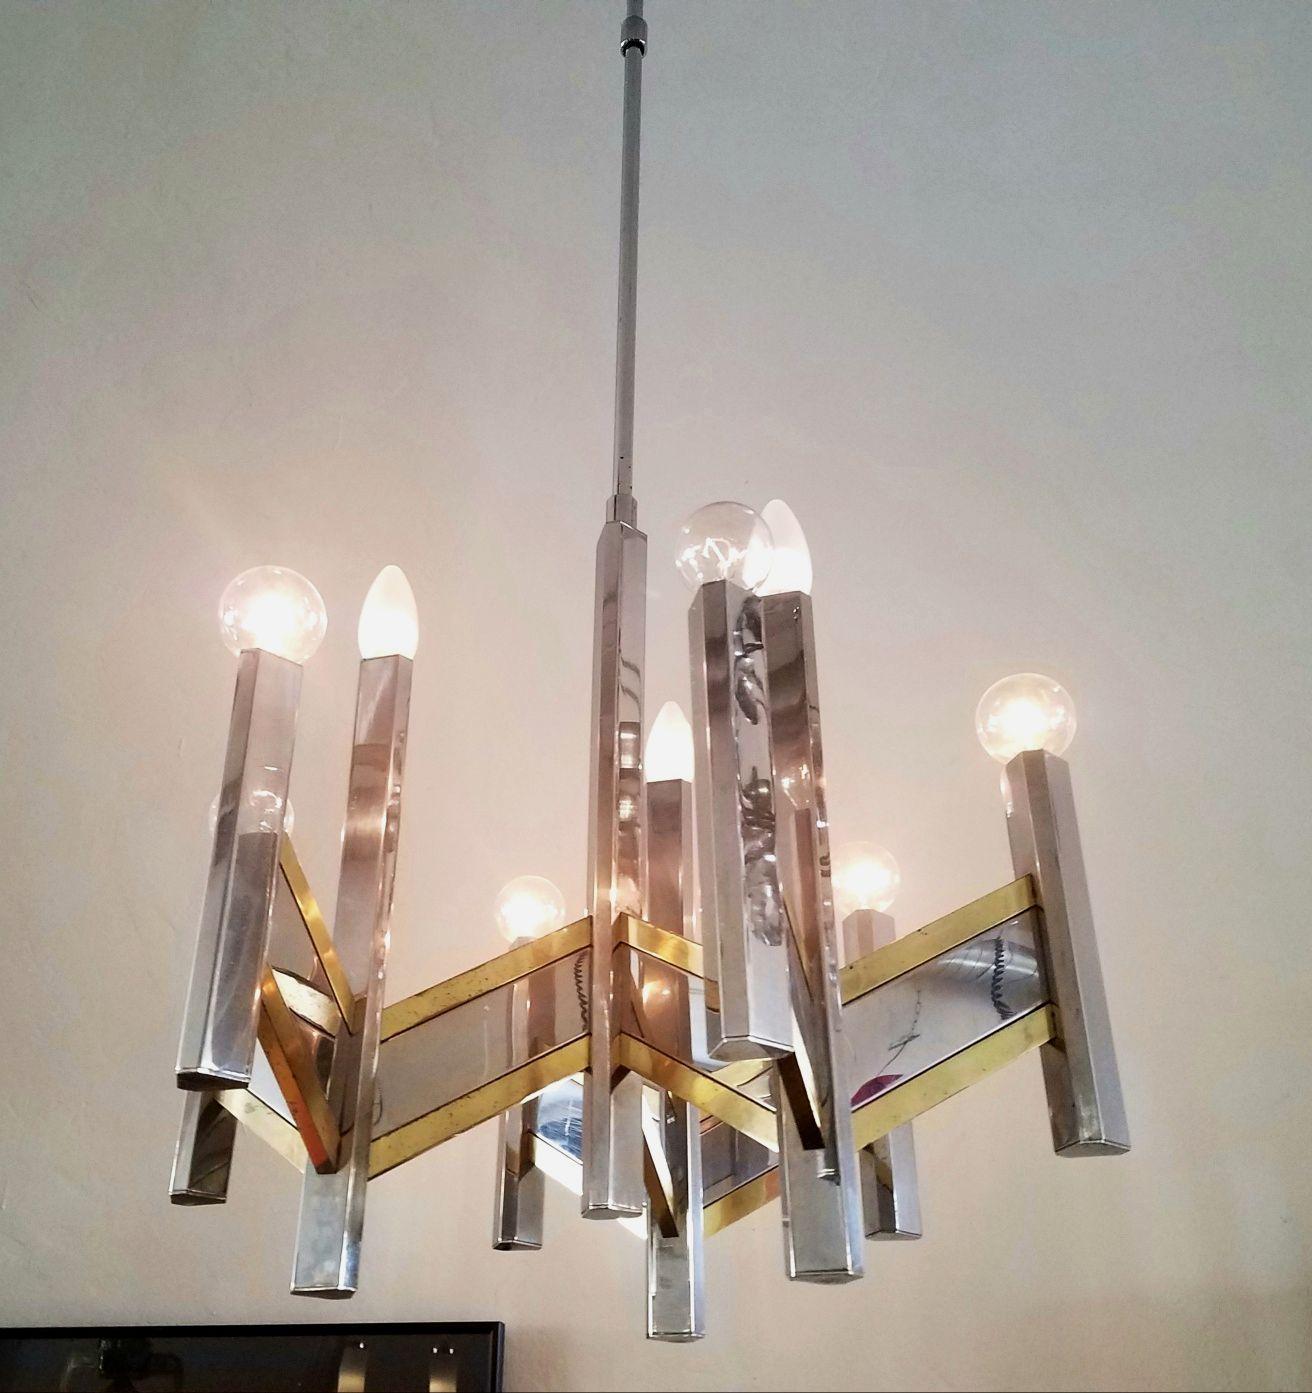 Italian midcentury chandelier by Sciolari. Chandelier have adjustable height second height is 36 inches. Combination of brass and chrome, 12 candelabra light.